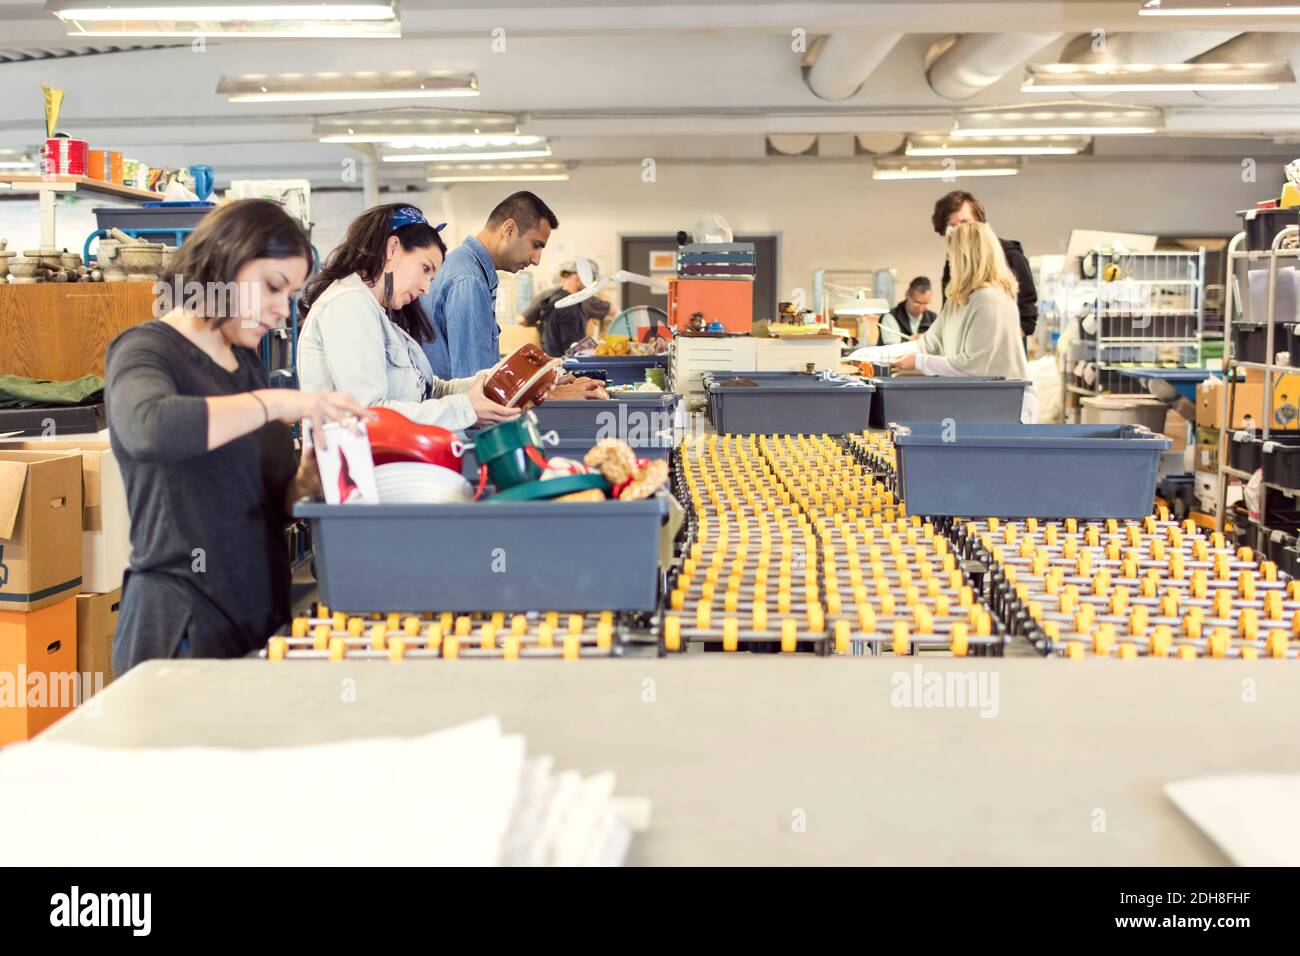 Serious volunteers checking objects in crates on production line at illuminated workshop Stock Photo